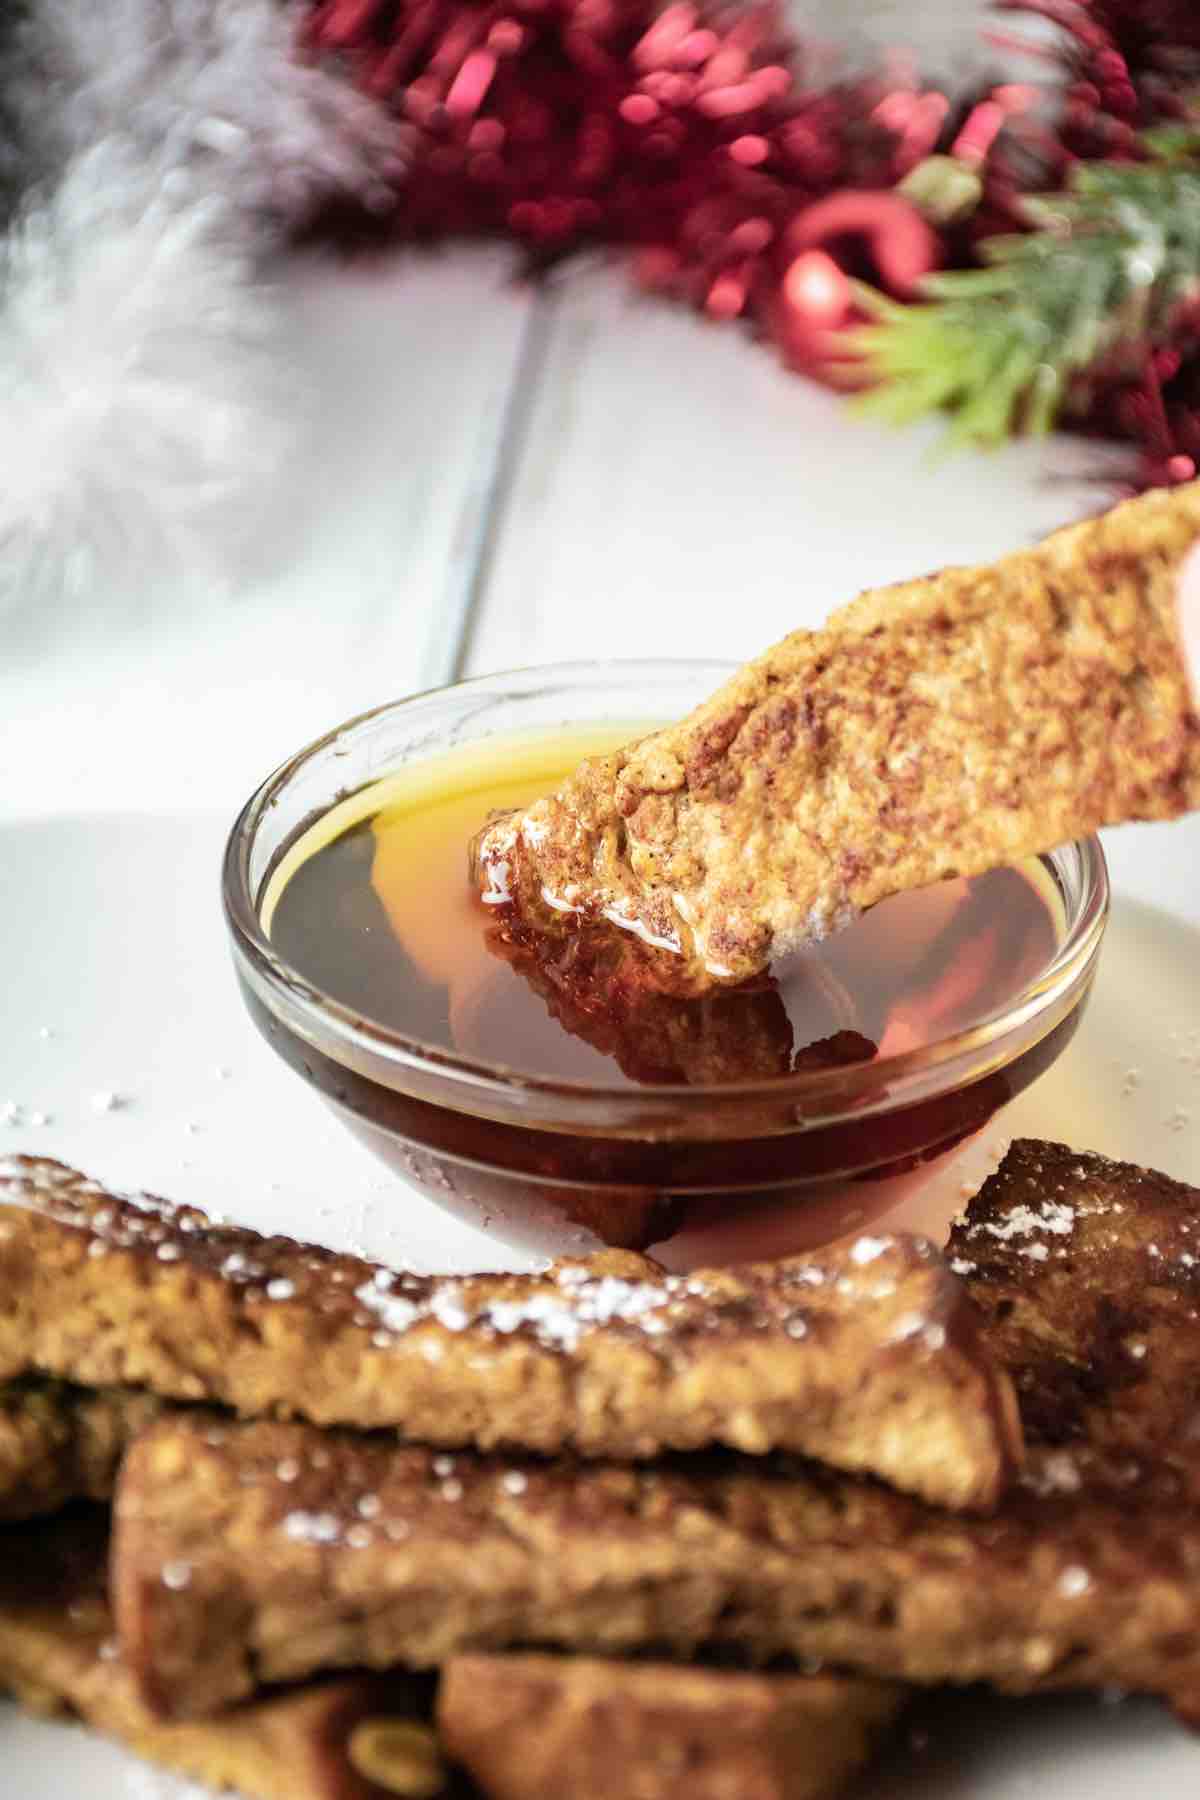 Boozy French toast sticks made with good quality cognac.